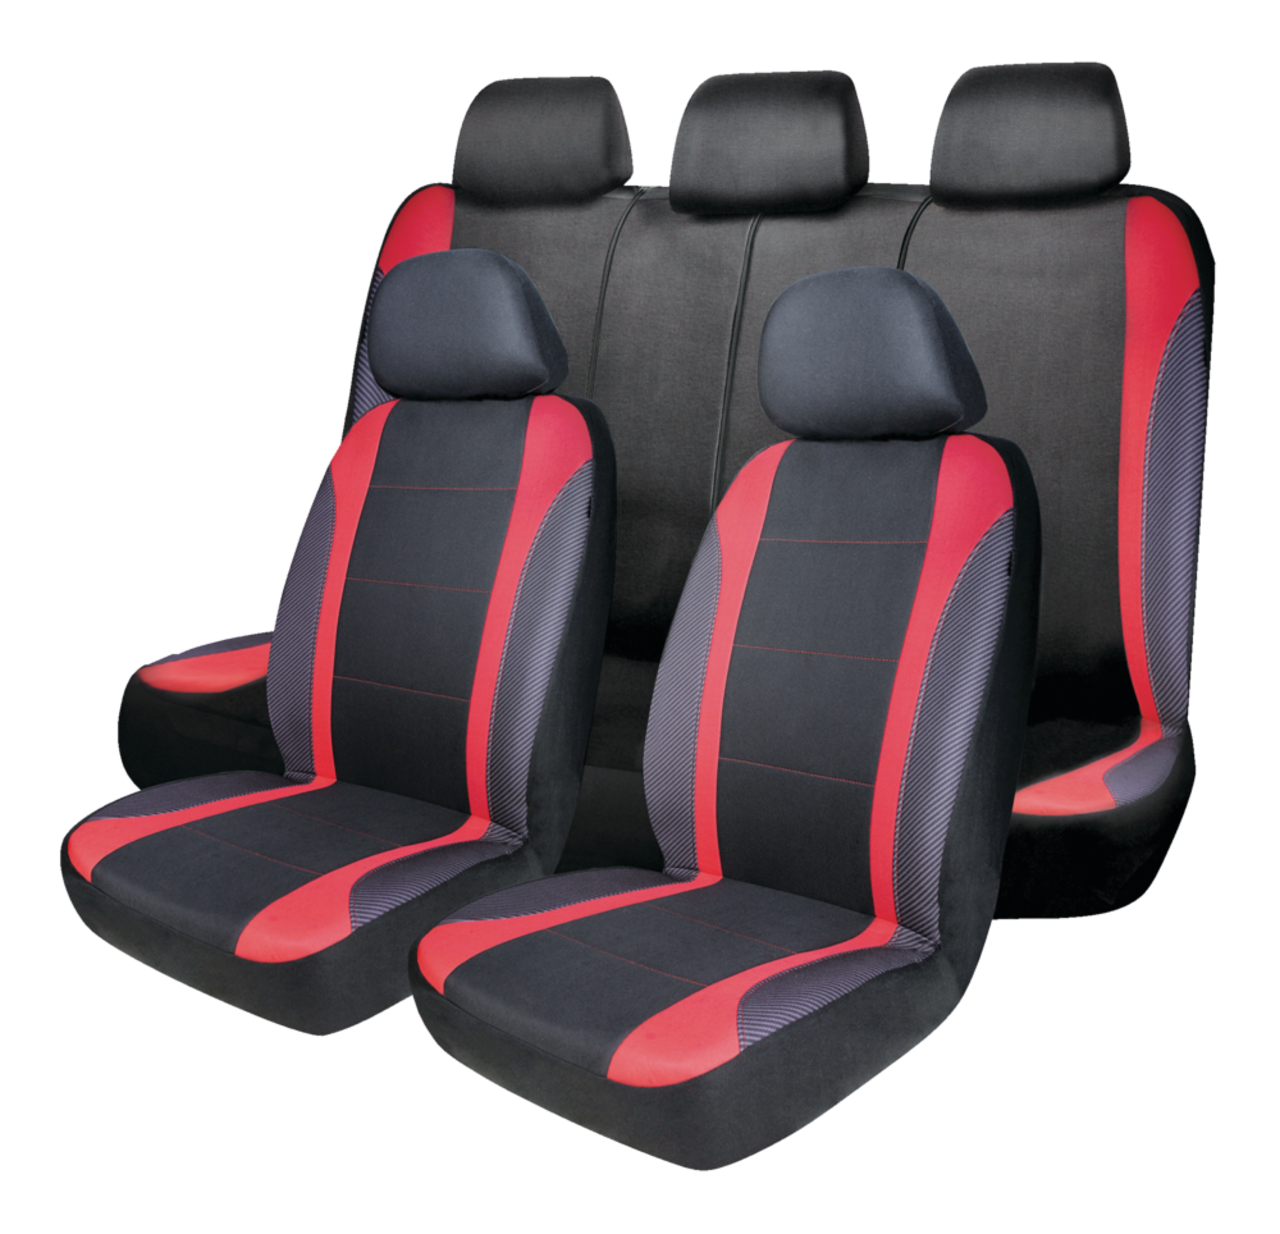 https://media-www.canadiantire.ca/product/automotive/car-care-accessories/auto-comfort/0326290/autotrends-black-and-red-carbon-fibre-seat-cover-kit-3pc--6826505a-5260-4ac9-87c7-3675bb760372.png?imdensity=1&imwidth=640&impolicy=mZoom